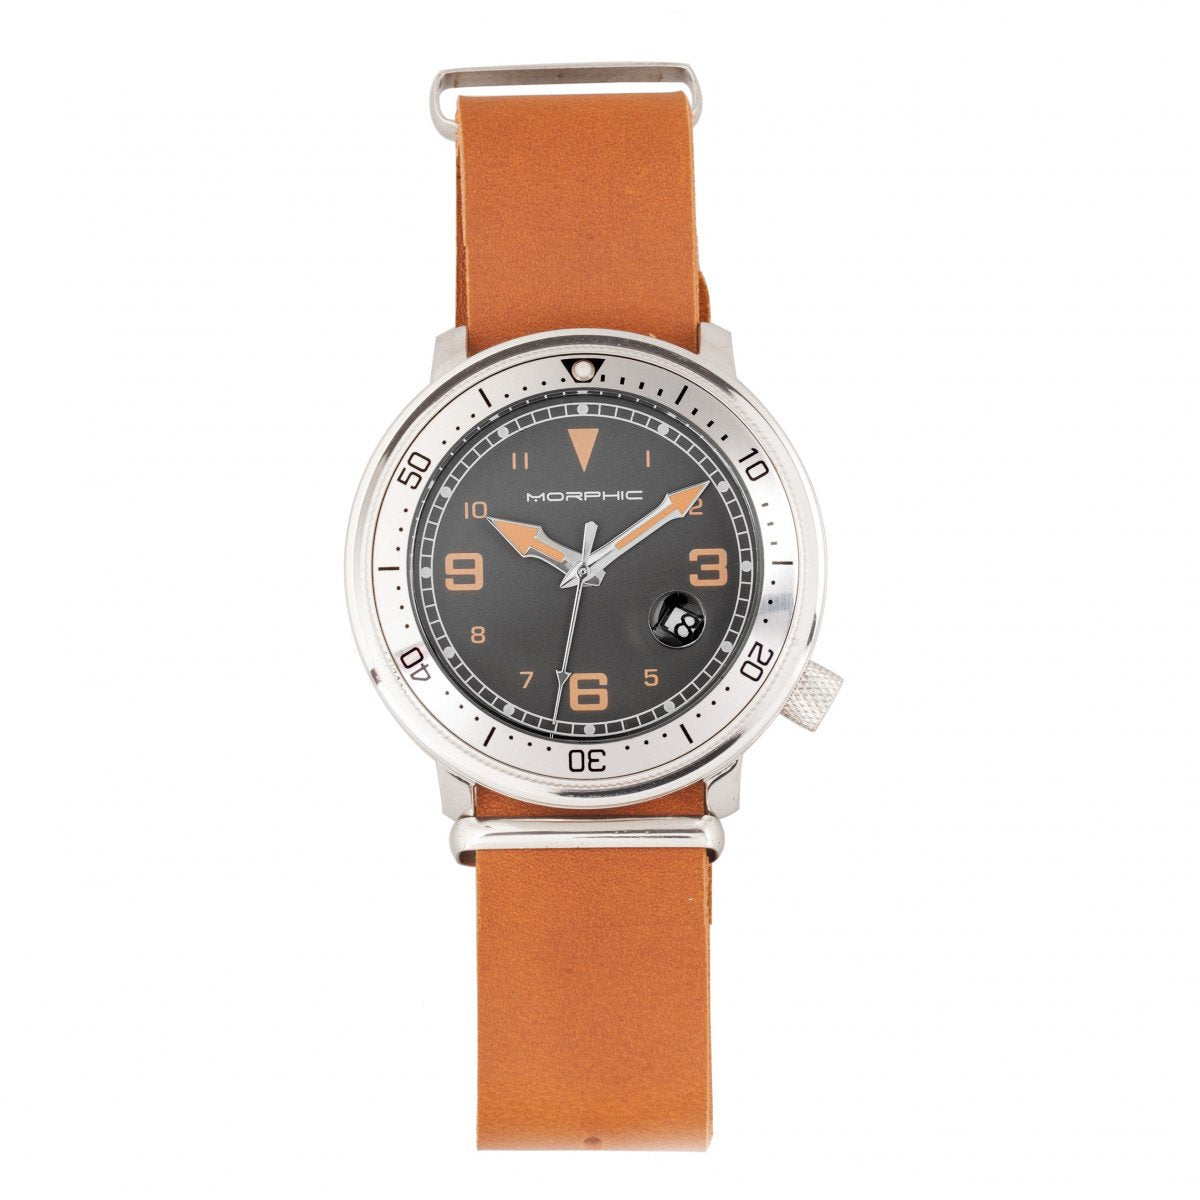 Morphic M74 Series Leather-Band Watch w/Magnified Date Display - Camel/Silver/Brown - MPH7412